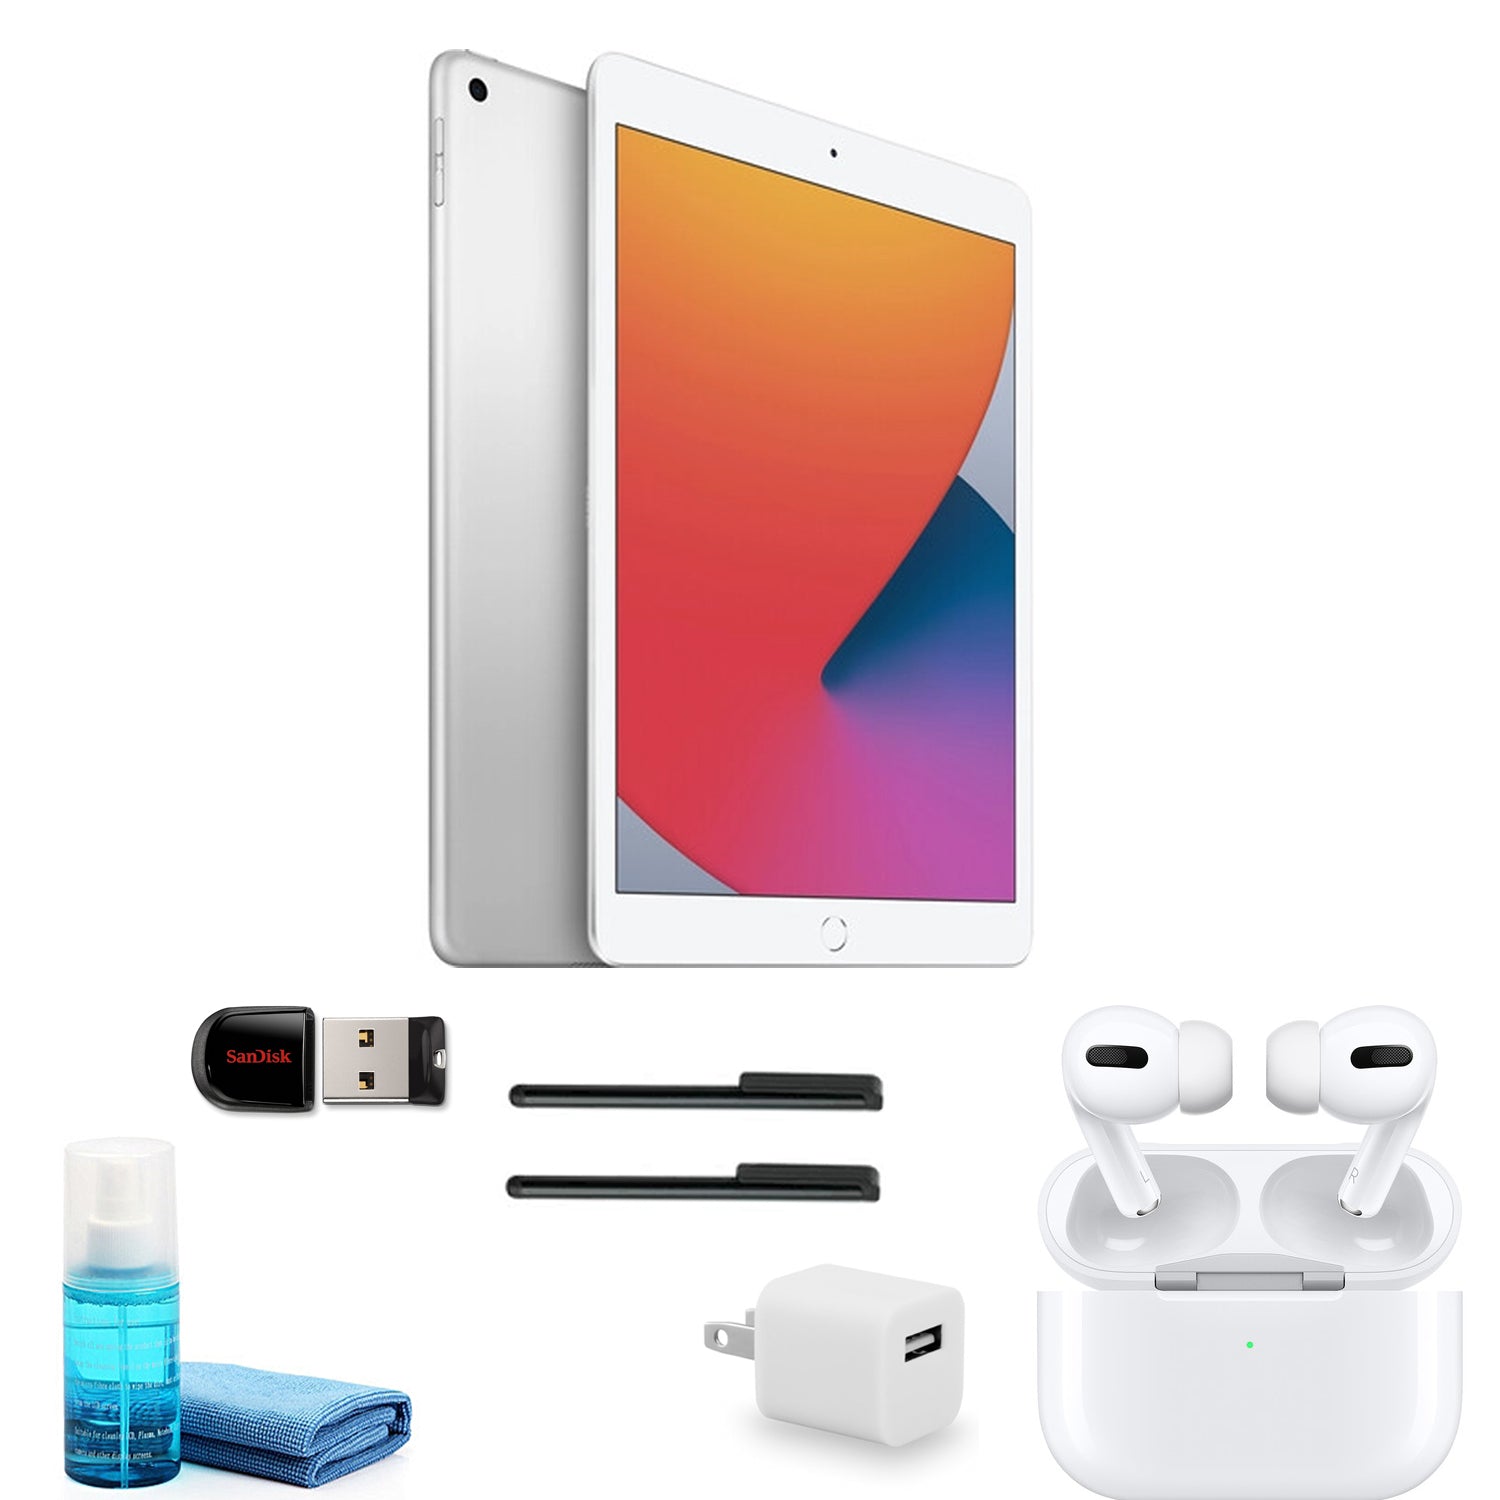 Apple iPad 10.2 Inch (128GB, Silver, MYLE2LL/A) with Apple AirPods Pro and more